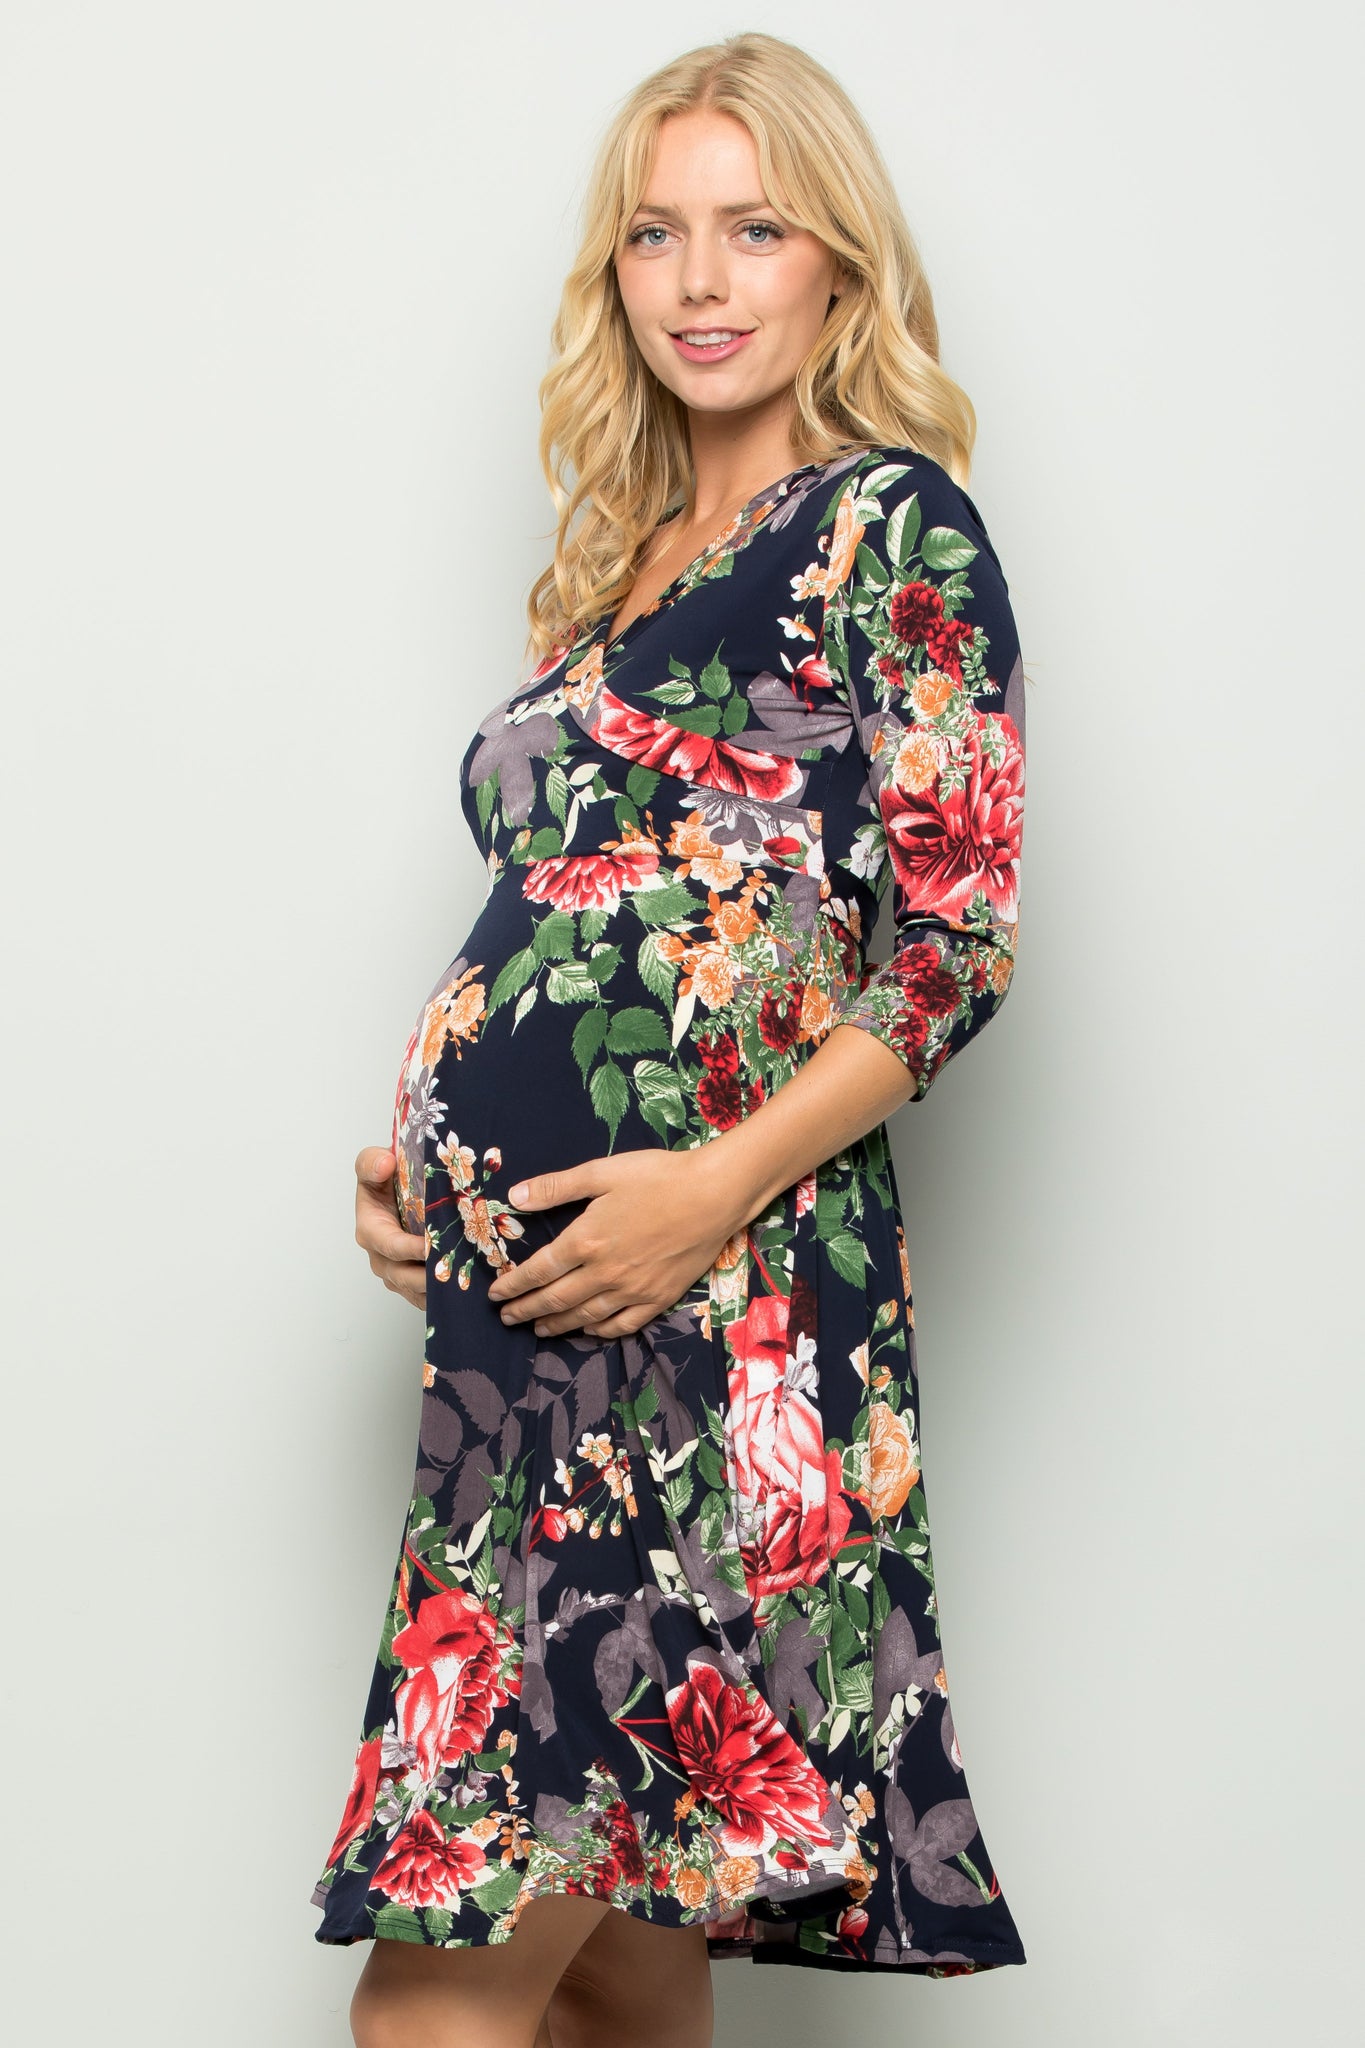 My Bump Floral 3/4 Sleeve Surplice Fit and Flare Maternity Dress